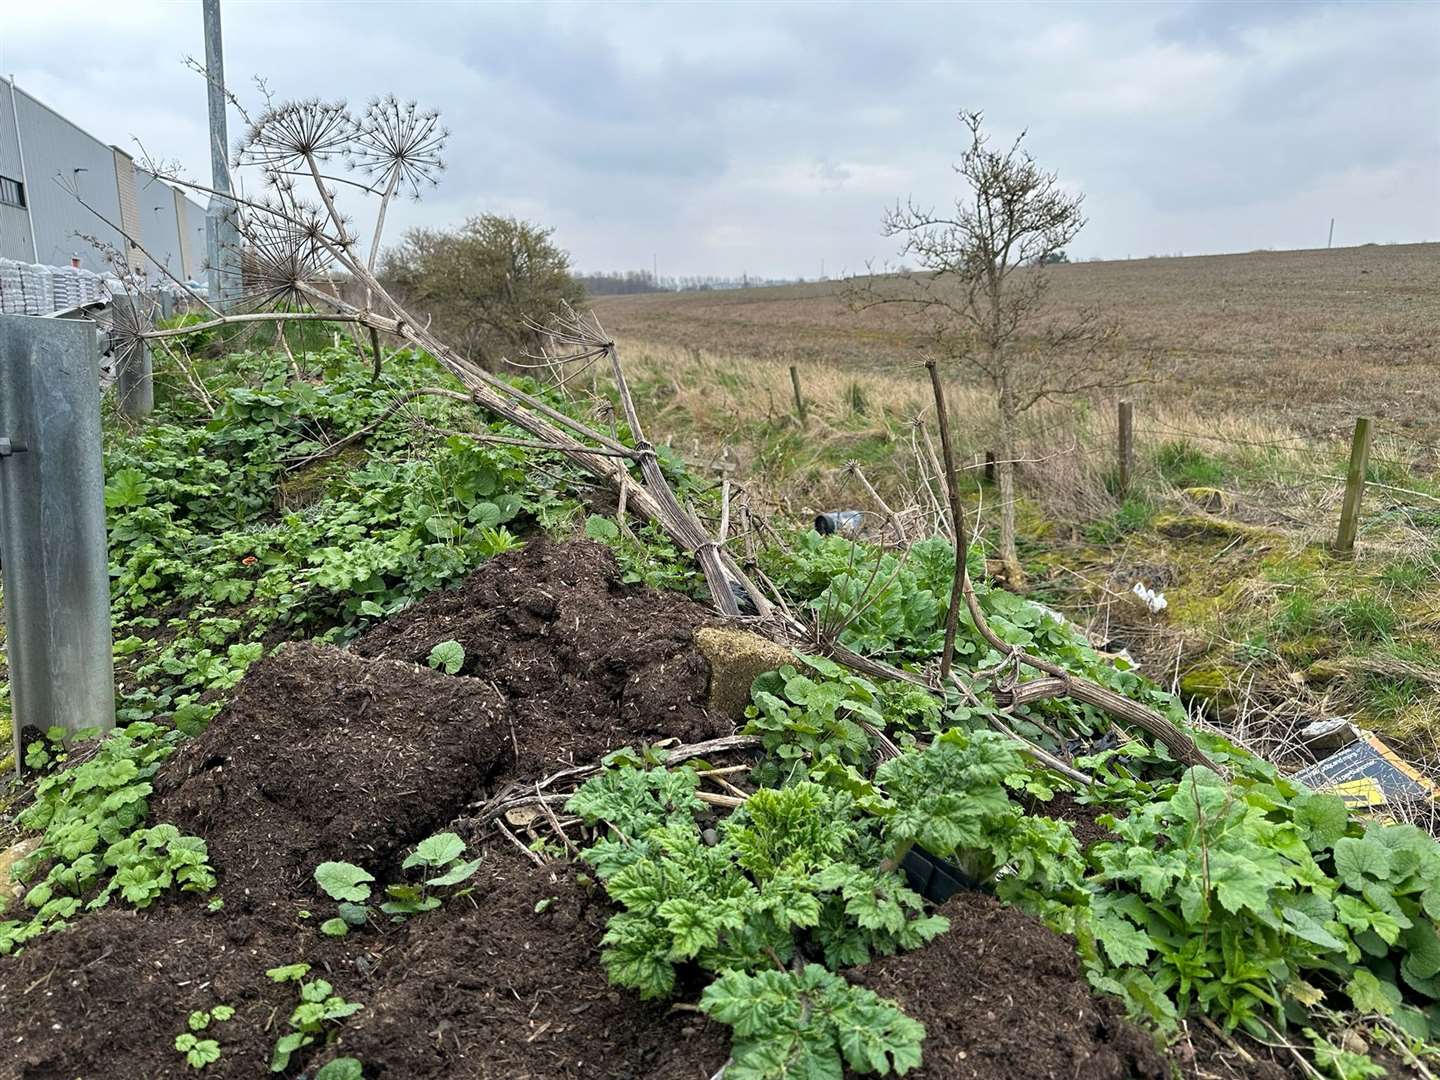 Giant Hogweed has been found growing much earlier than expected across the whole of Scotland - these examples were spotted in Musselburgh